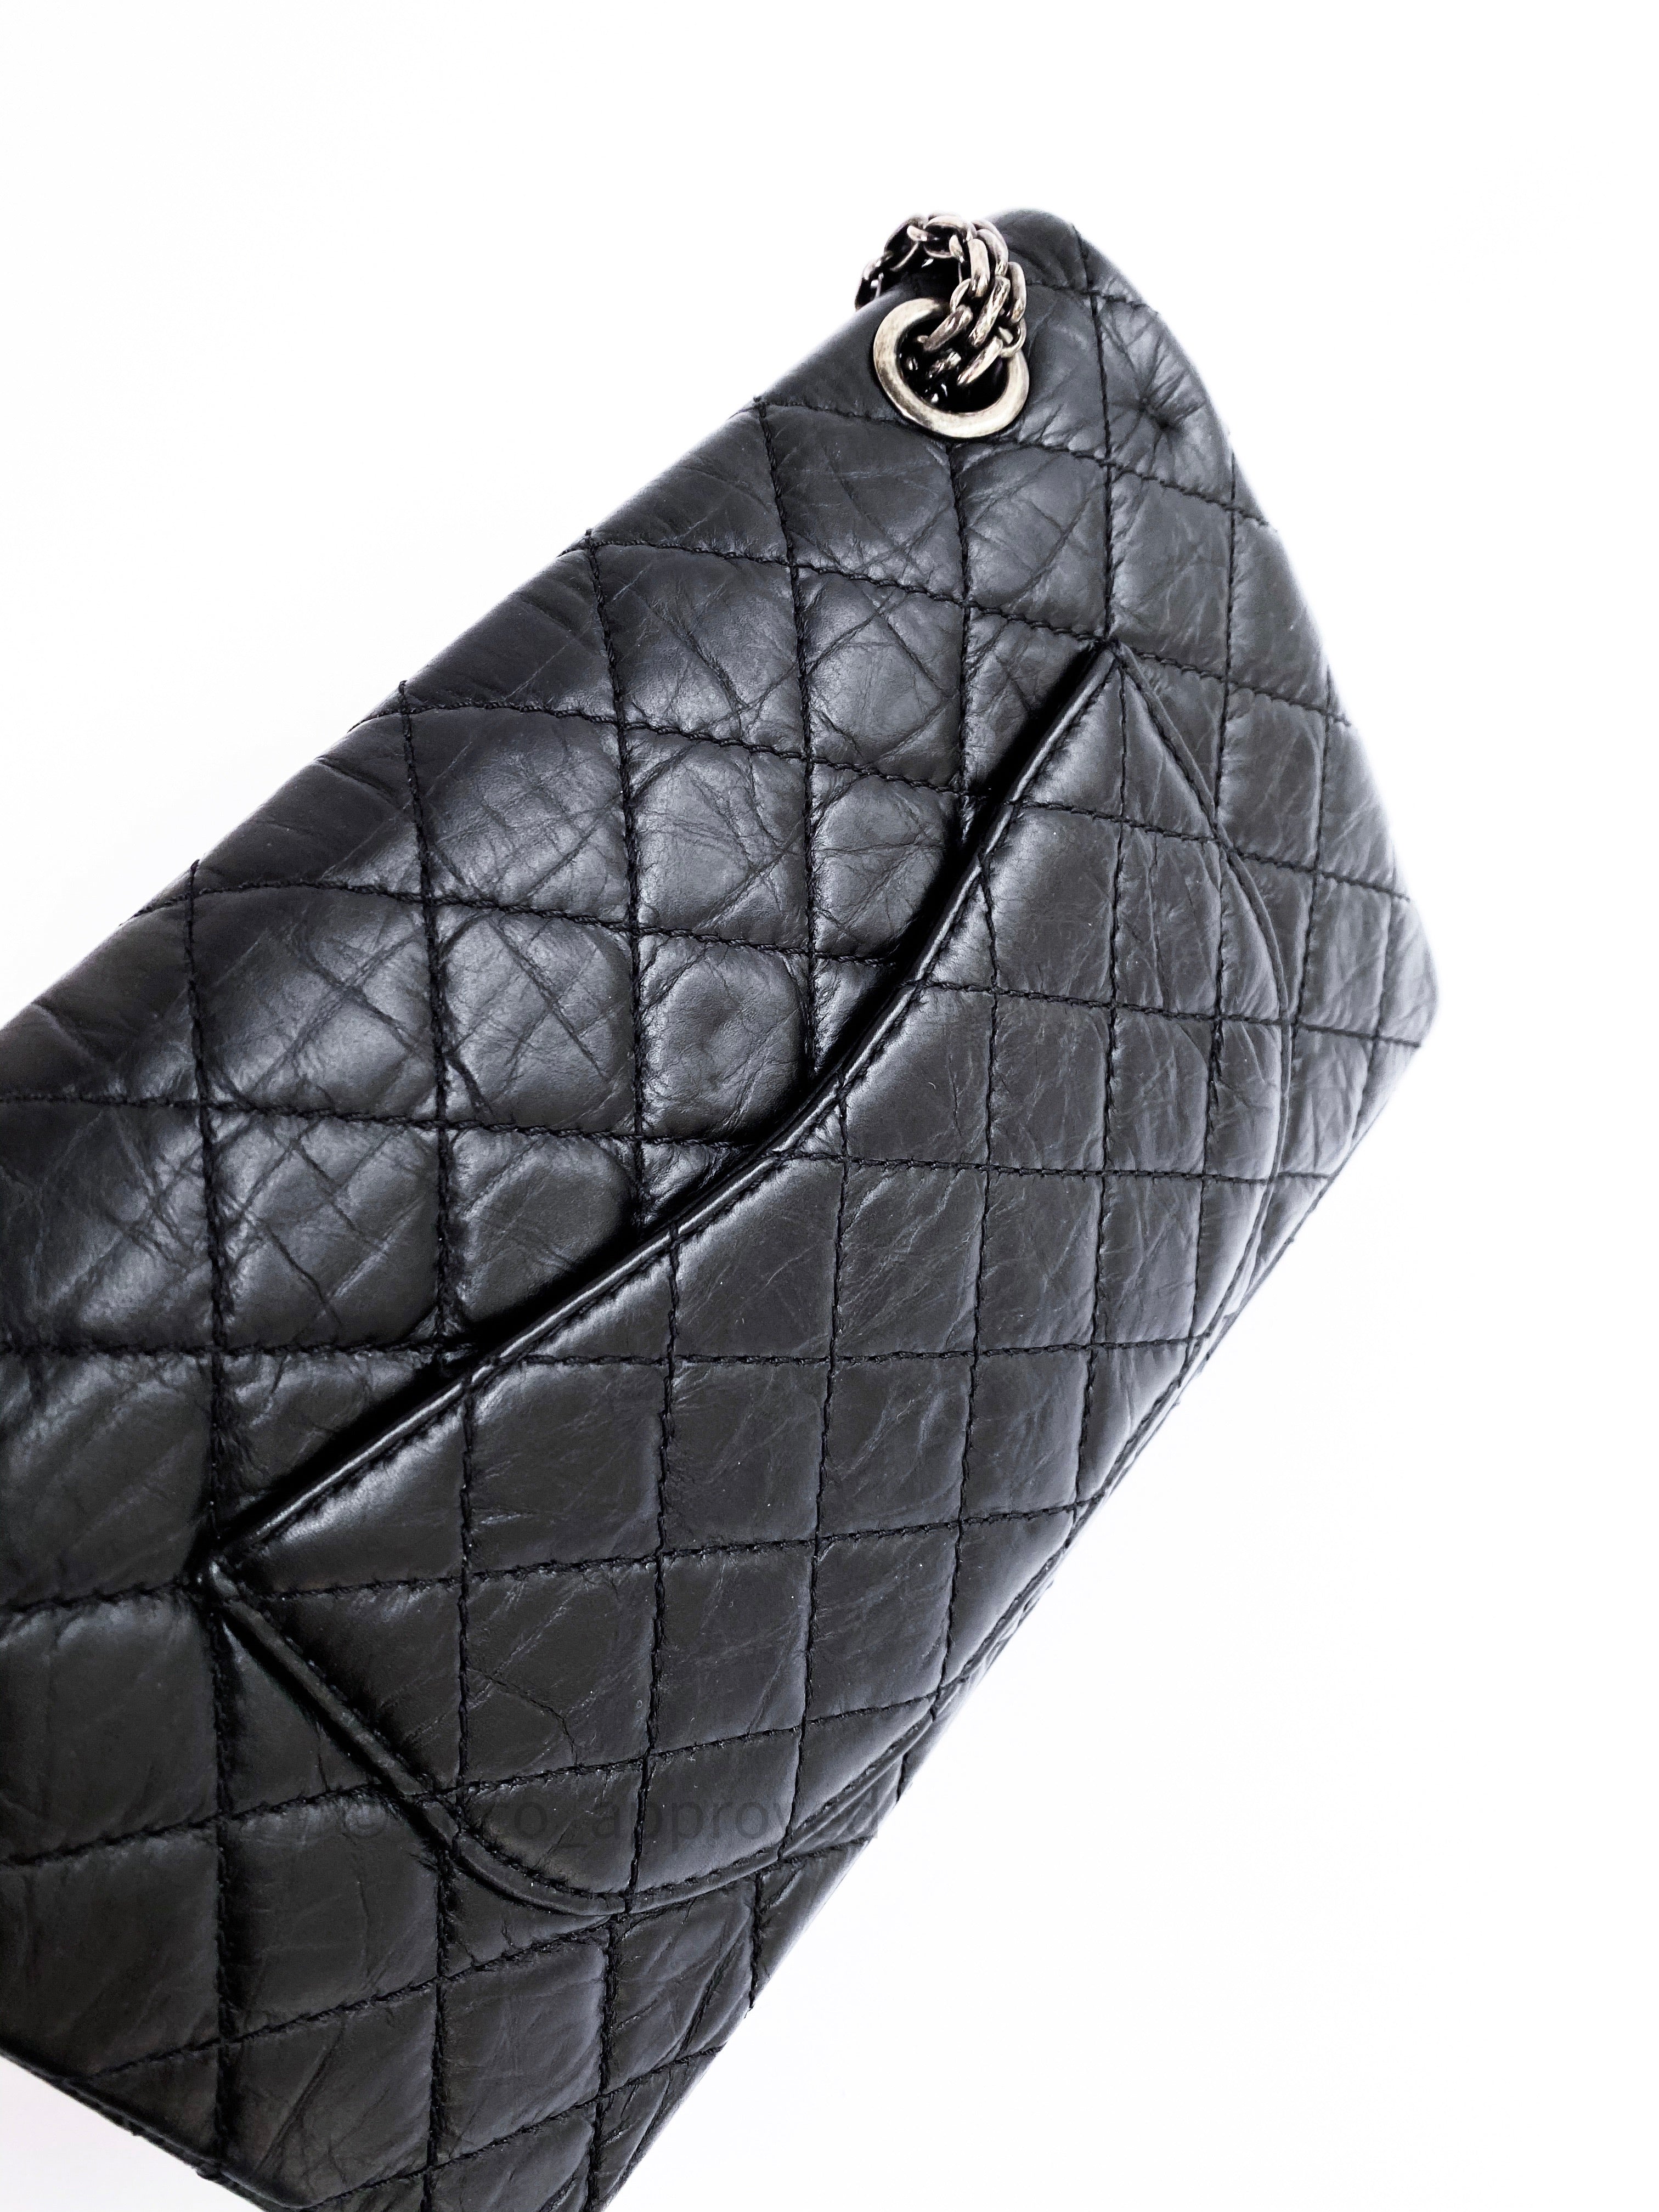 Chanel So Black Calfskin Leather Quilted 2.55 Reissue 226 Classic Flap Bag